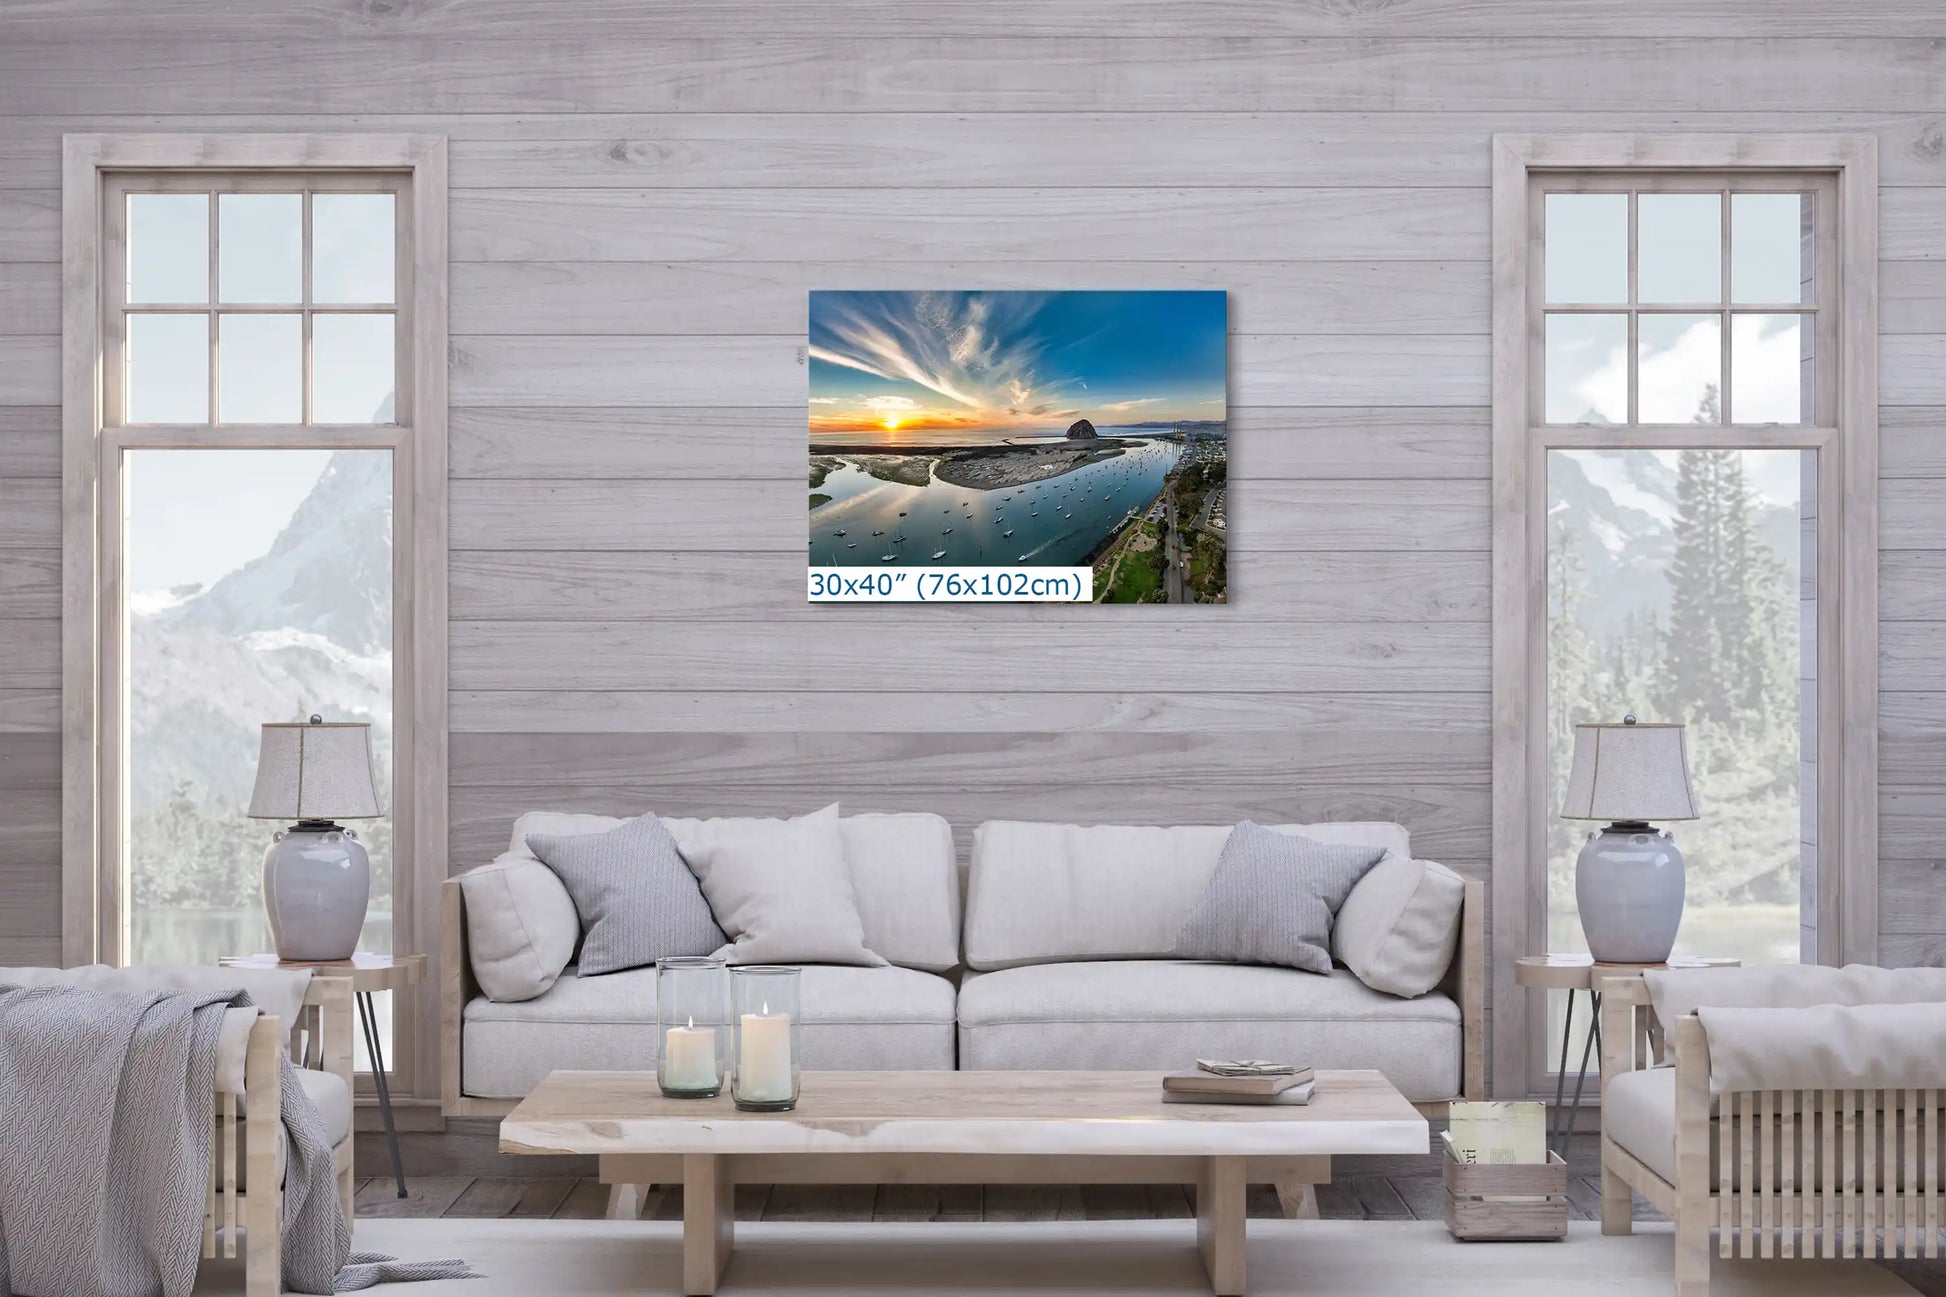 Large 30x40 canvas in a living space, showcasing Morro Bay's aerial view, a gift of decoration that celebrates the outdoors and coastal serenity.